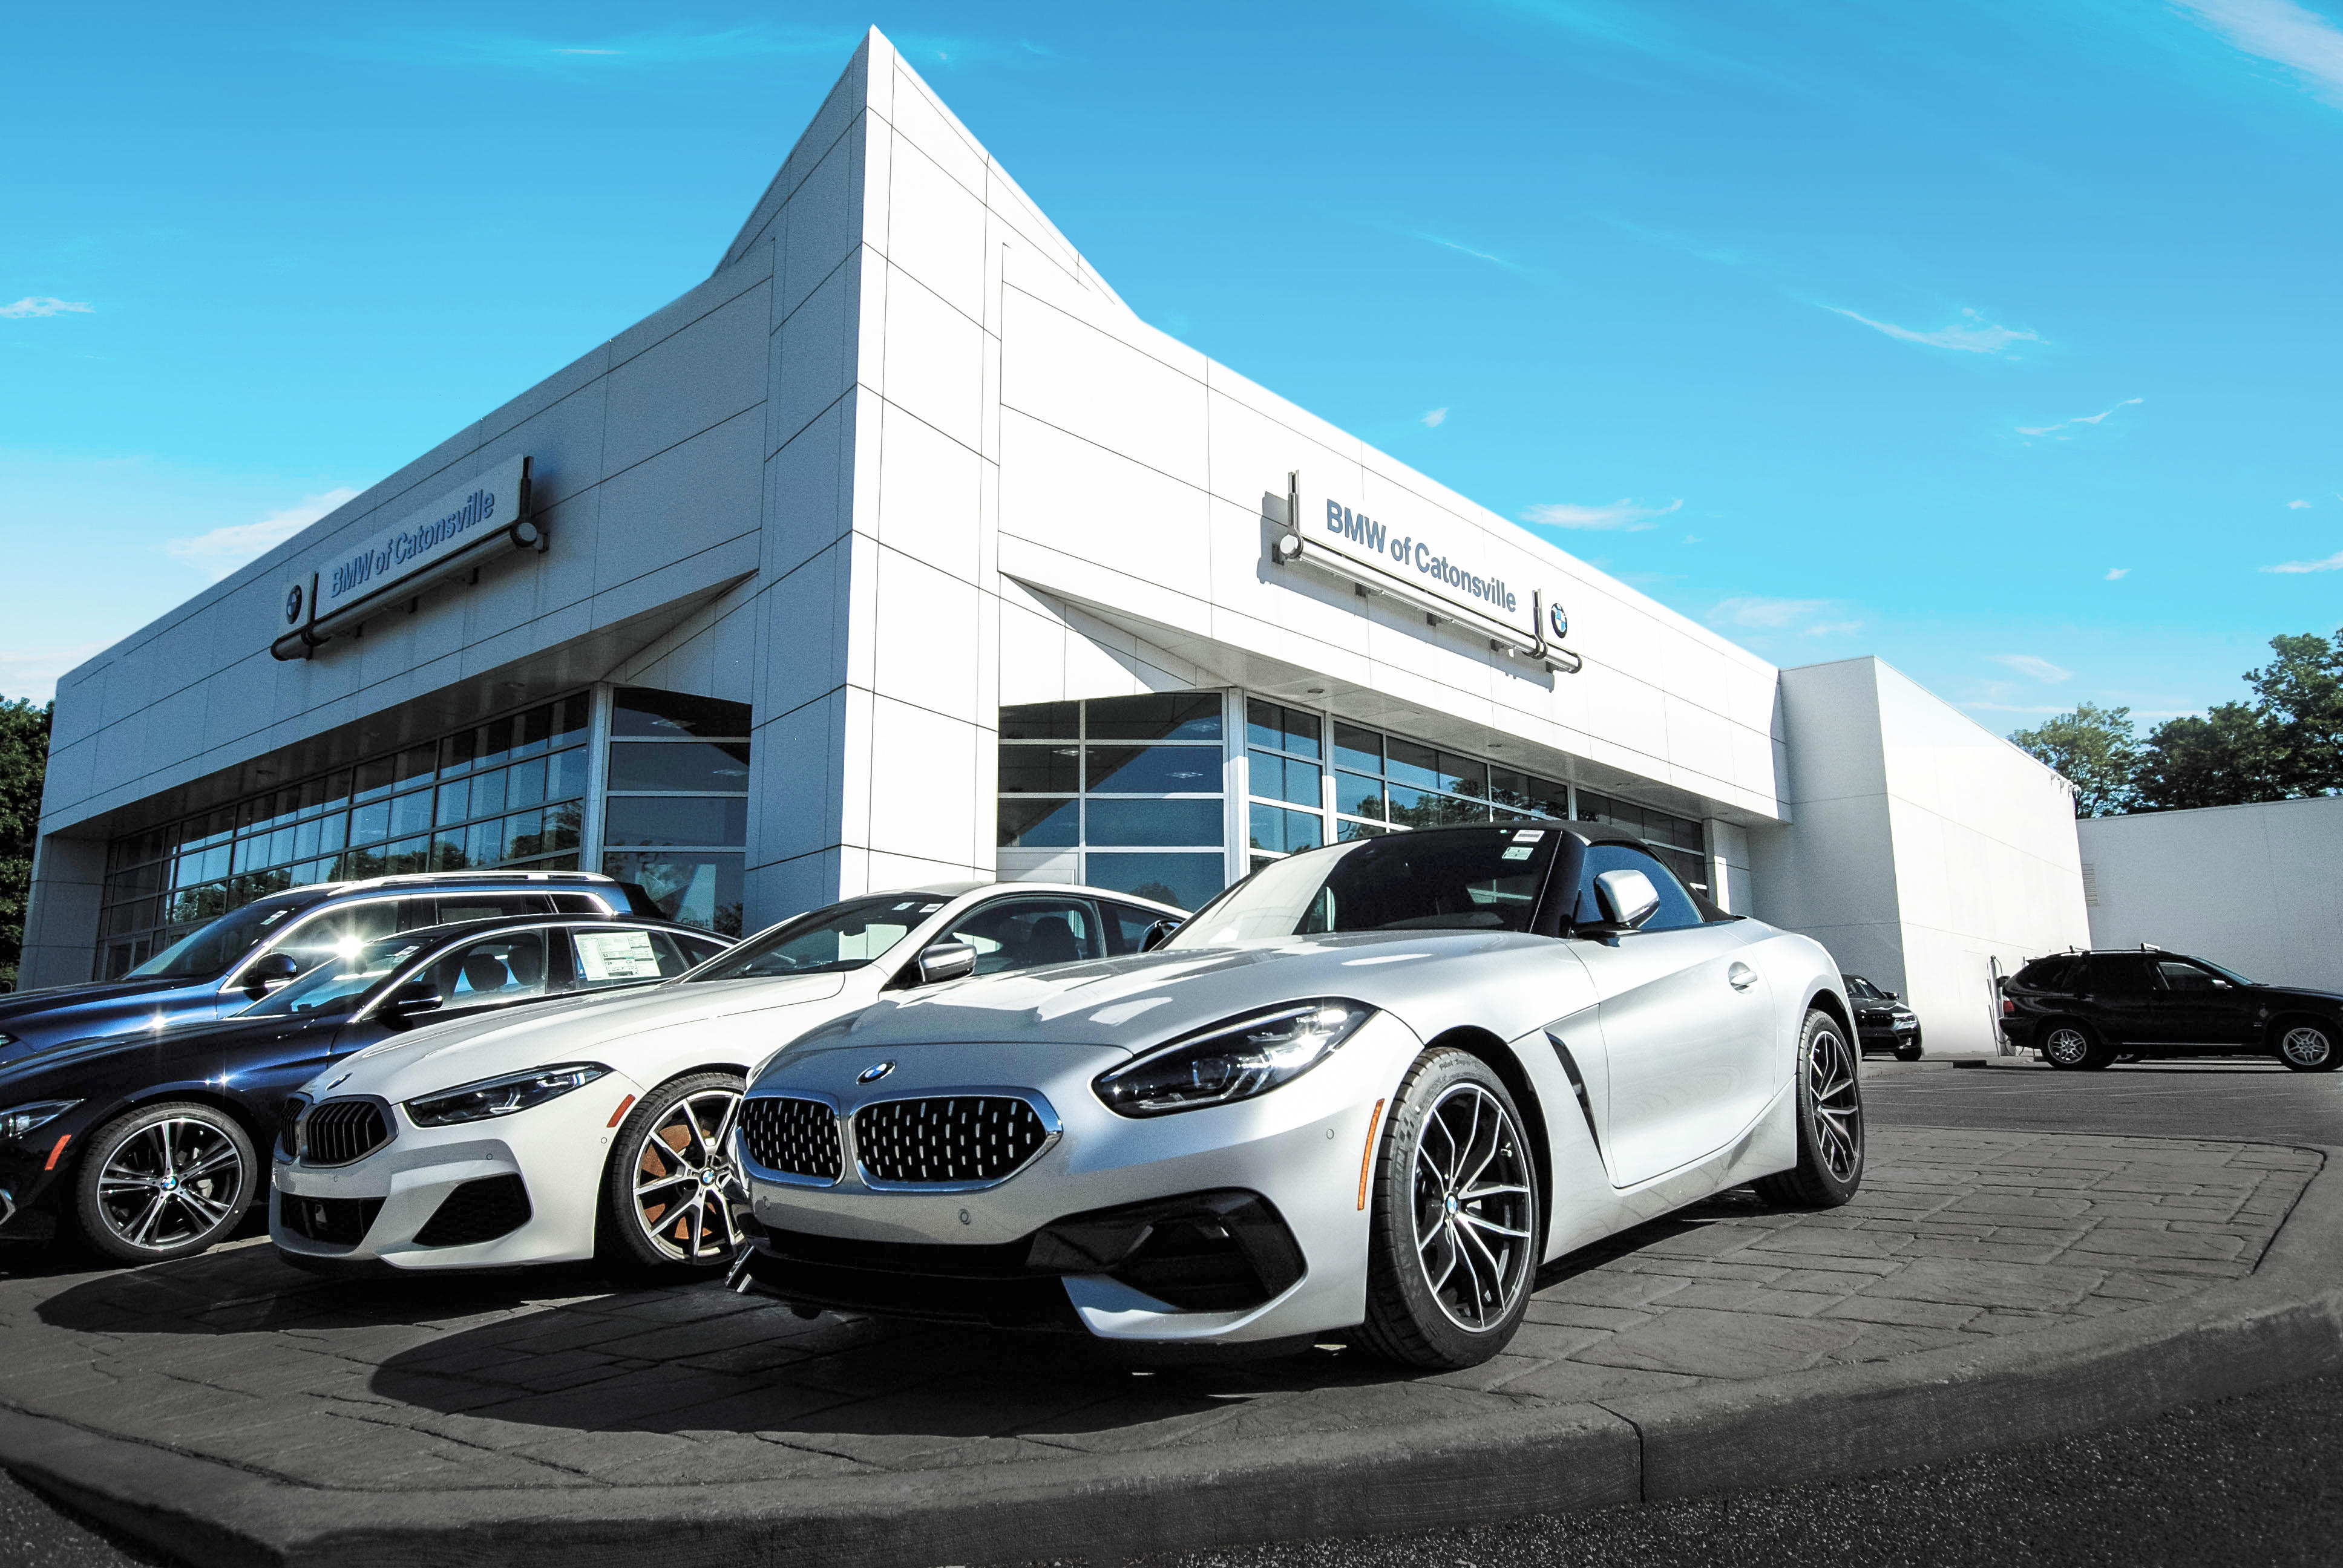 BMW of Catonsville - Baltimore, MD 21228 - (844)221-1352 | ShowMeLocal.com